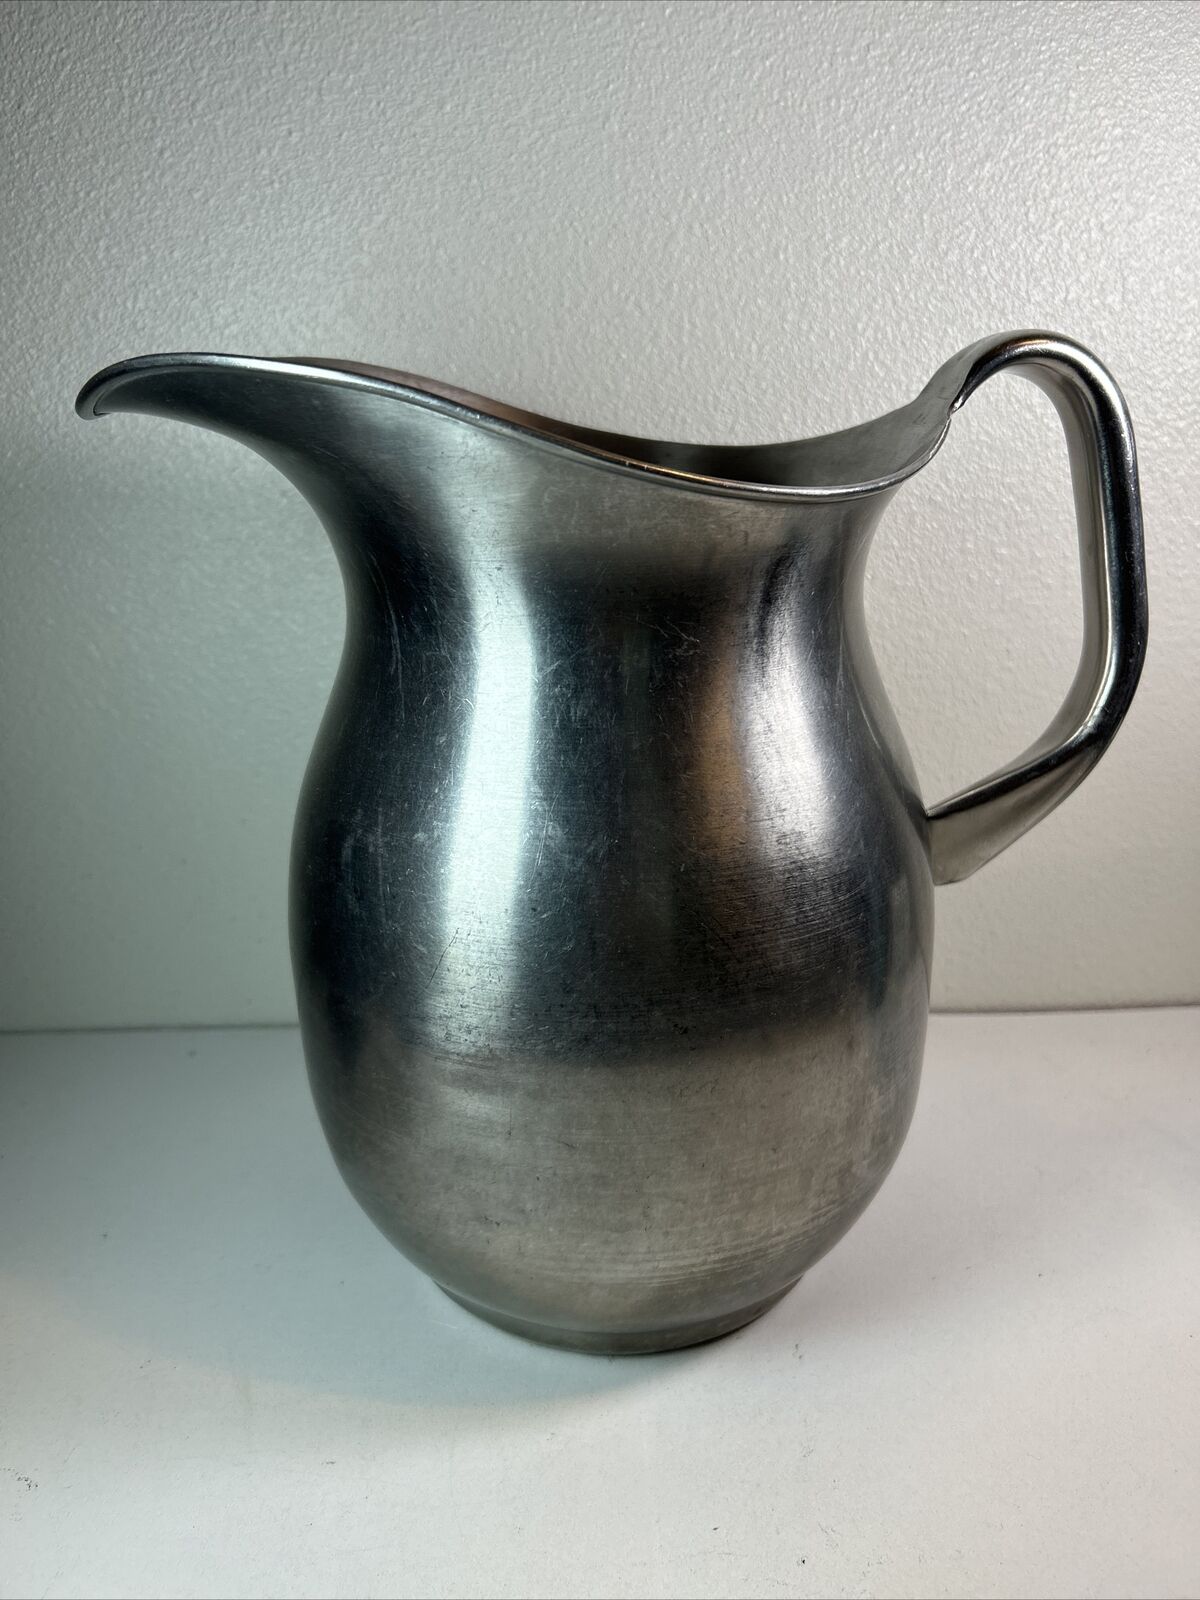 Vintage Vollrath large Stainless Steel Pitcher 10in Tall American WWII